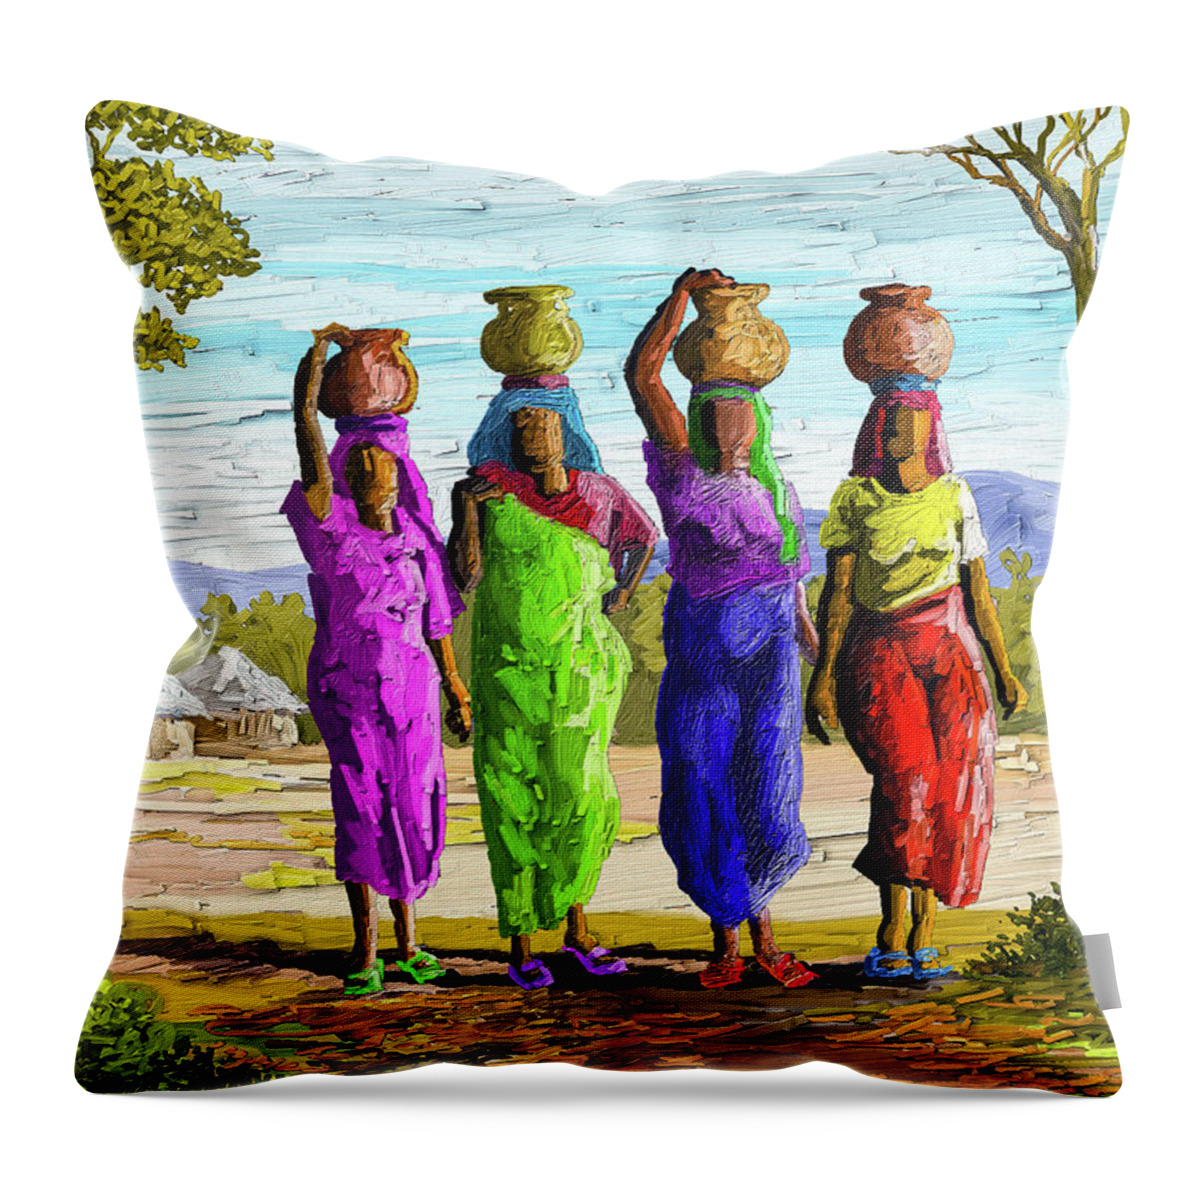 Melon Throw Pillow featuring the painting Precious Water by Anthony Mwangi